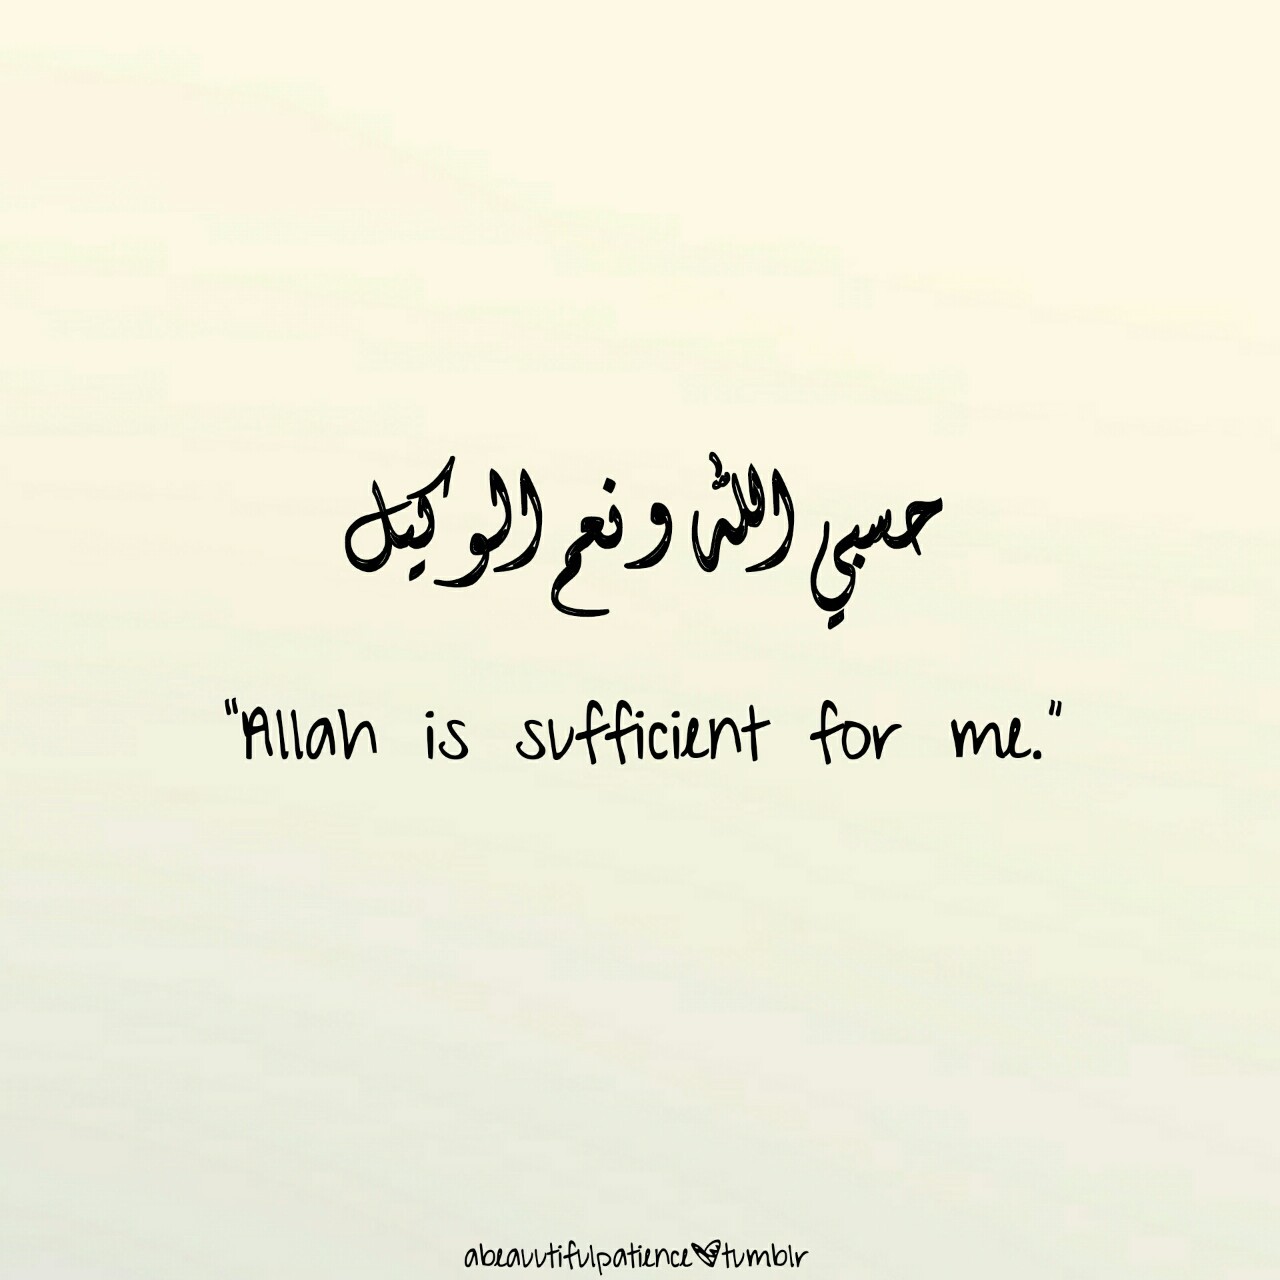 Abeauutifulpatience — “Allah Is Sufficient For Me.”